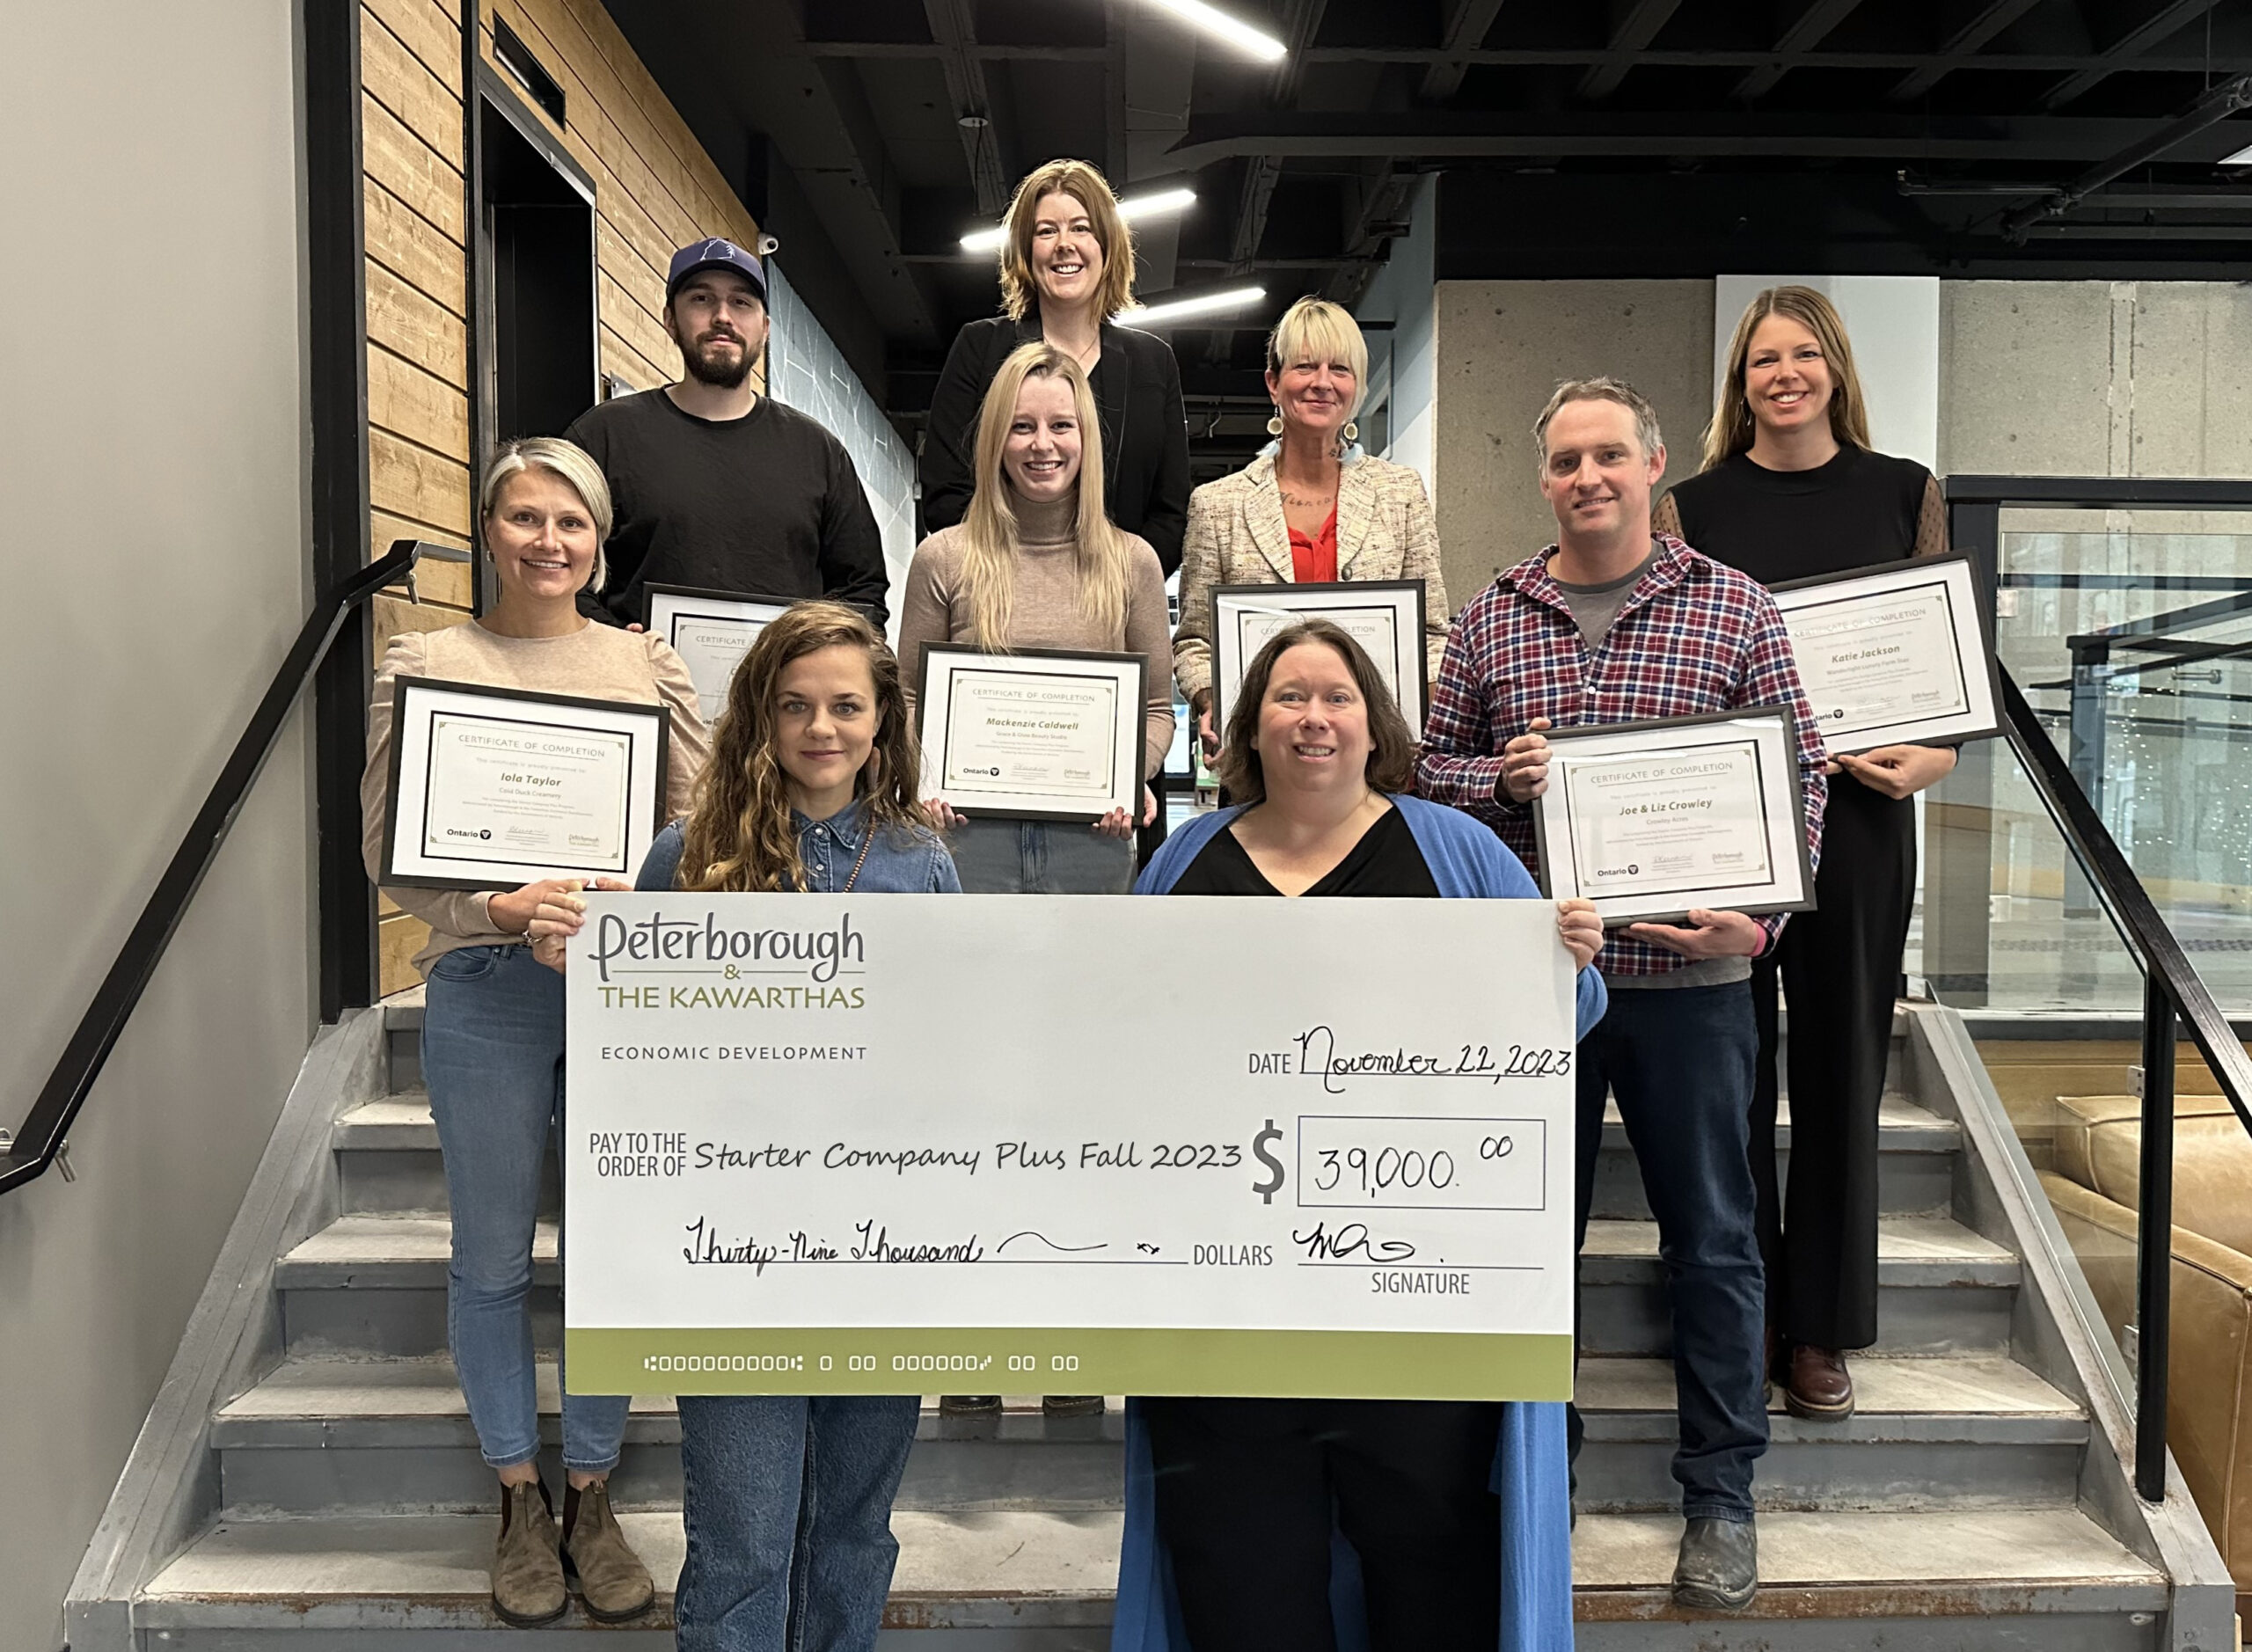 Photo of the Starter Company Plus grant recipients (Top: Madeleine Hurrell, Manager of the Business Advisory Centre; Middle left to right: Cody Lewis, Mackenzie Caldwell, Meaghan Kynock, Katie Jackson; Bottom left to right: Iola Taylor, Sara Scheuermann, Jordan Lyall, Joe Crowley)